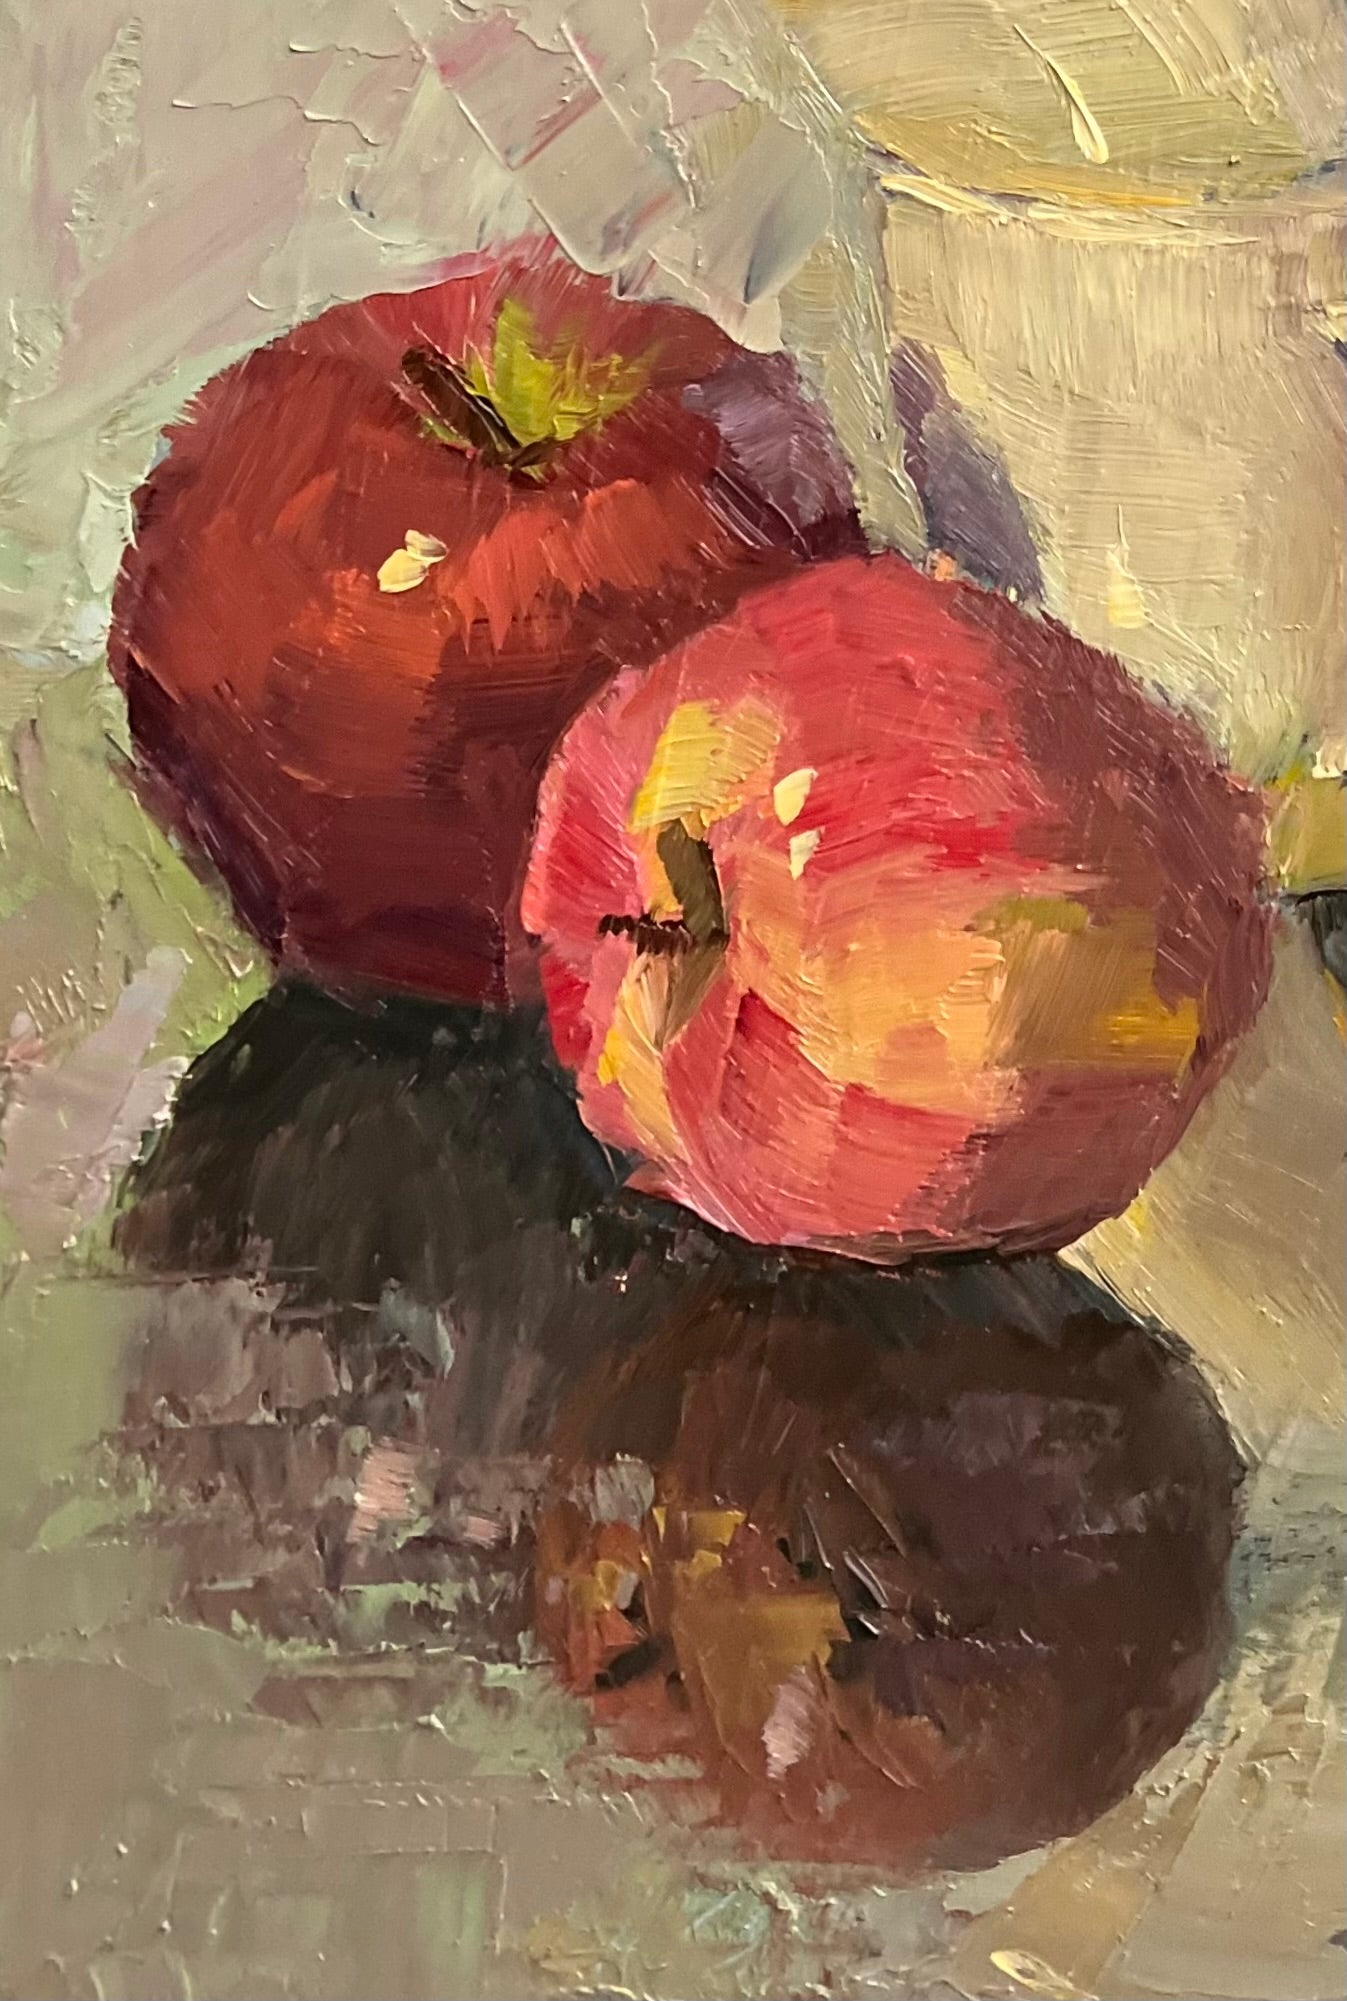 Apples and Cups - Small Original Oil Painting